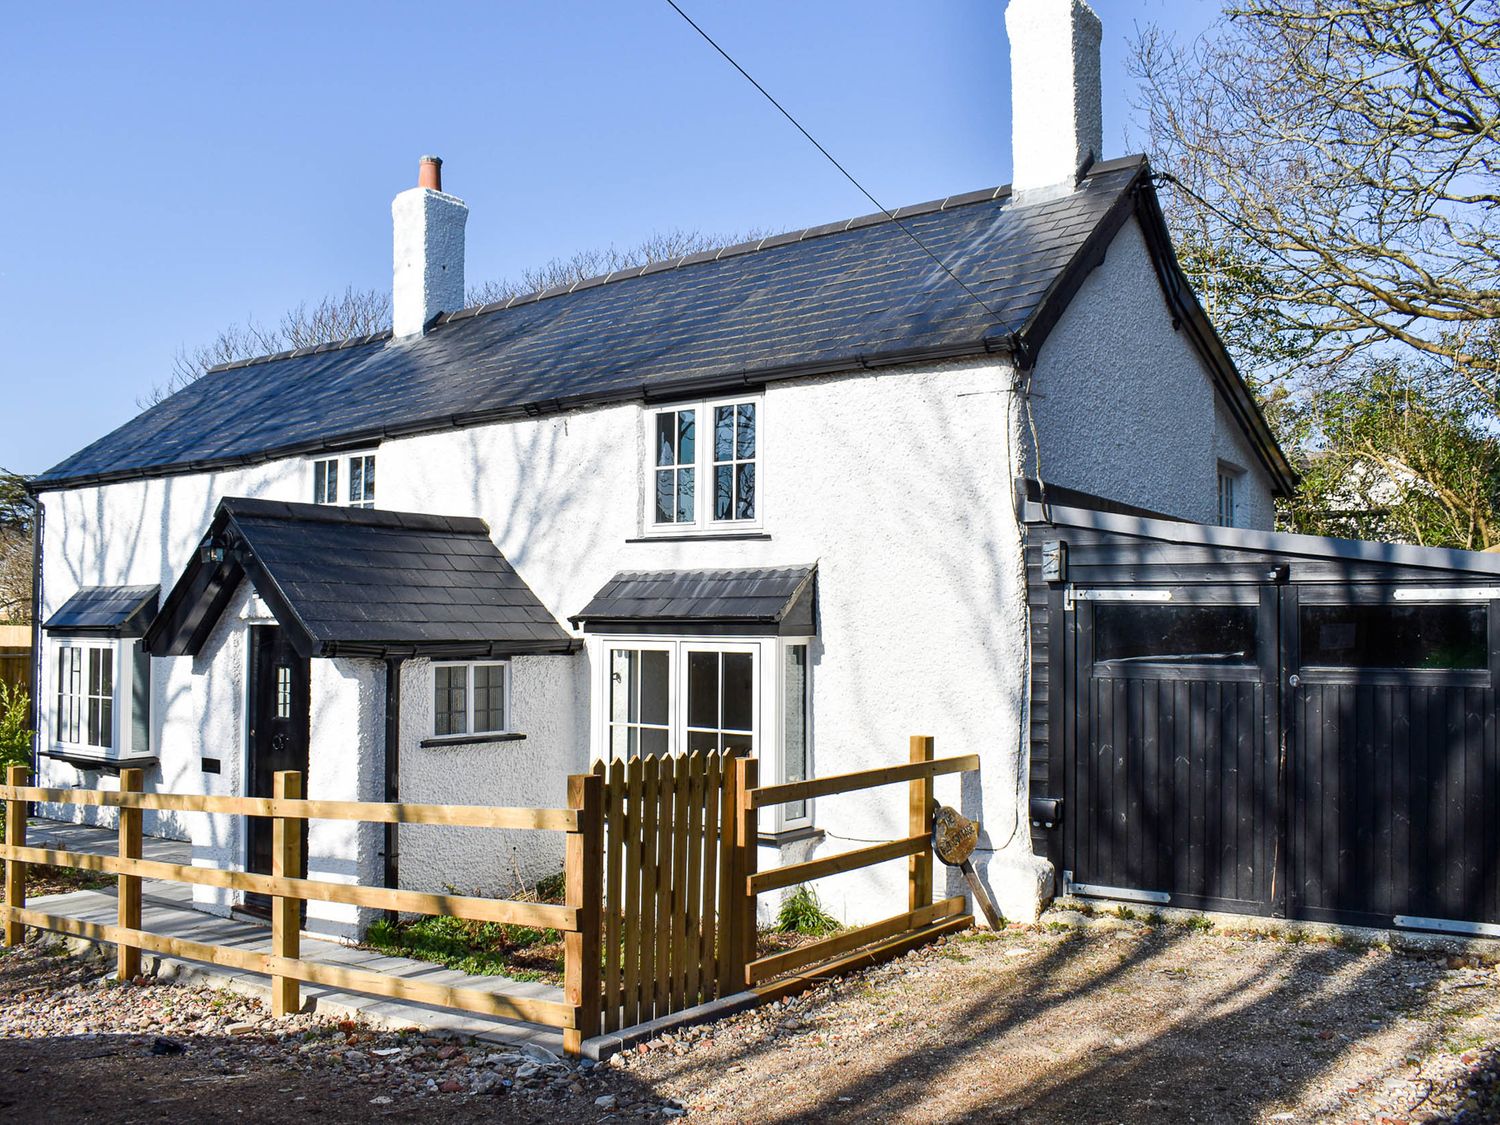 The Old Cottage - Hampshire - 1131701 - photo 1